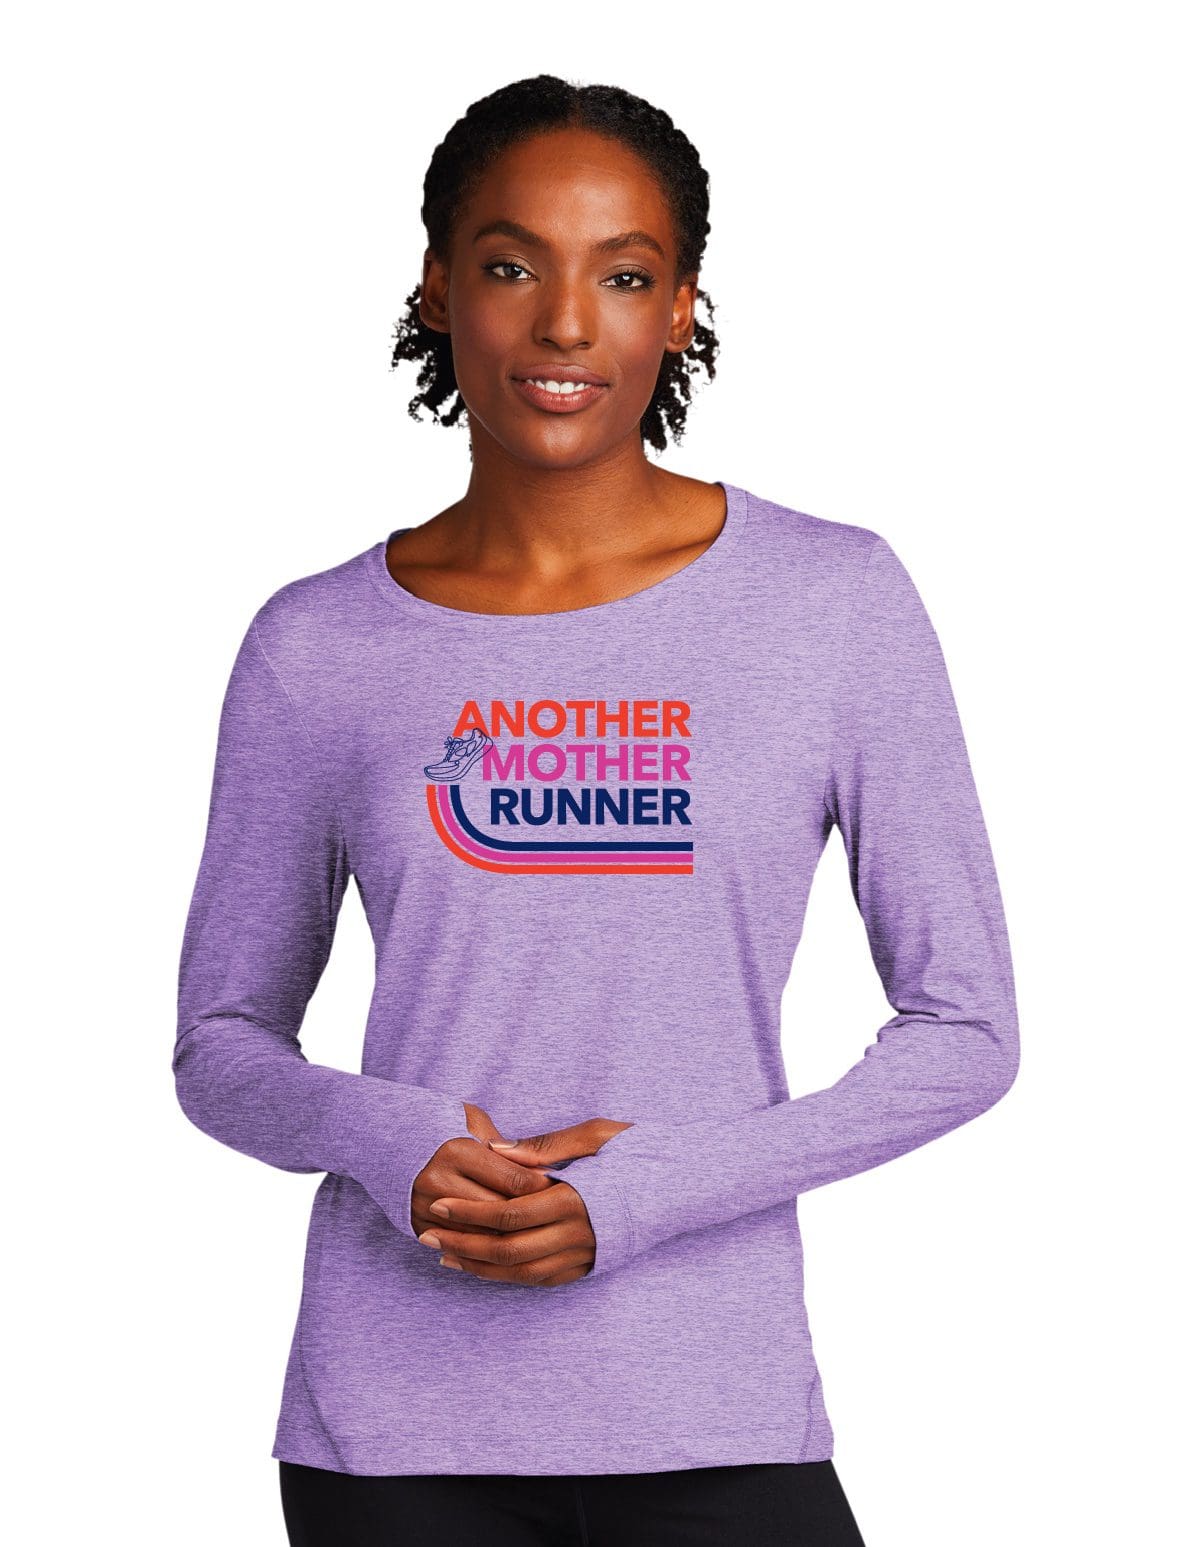 Run Tank Top in Purple - Another Mother Runner